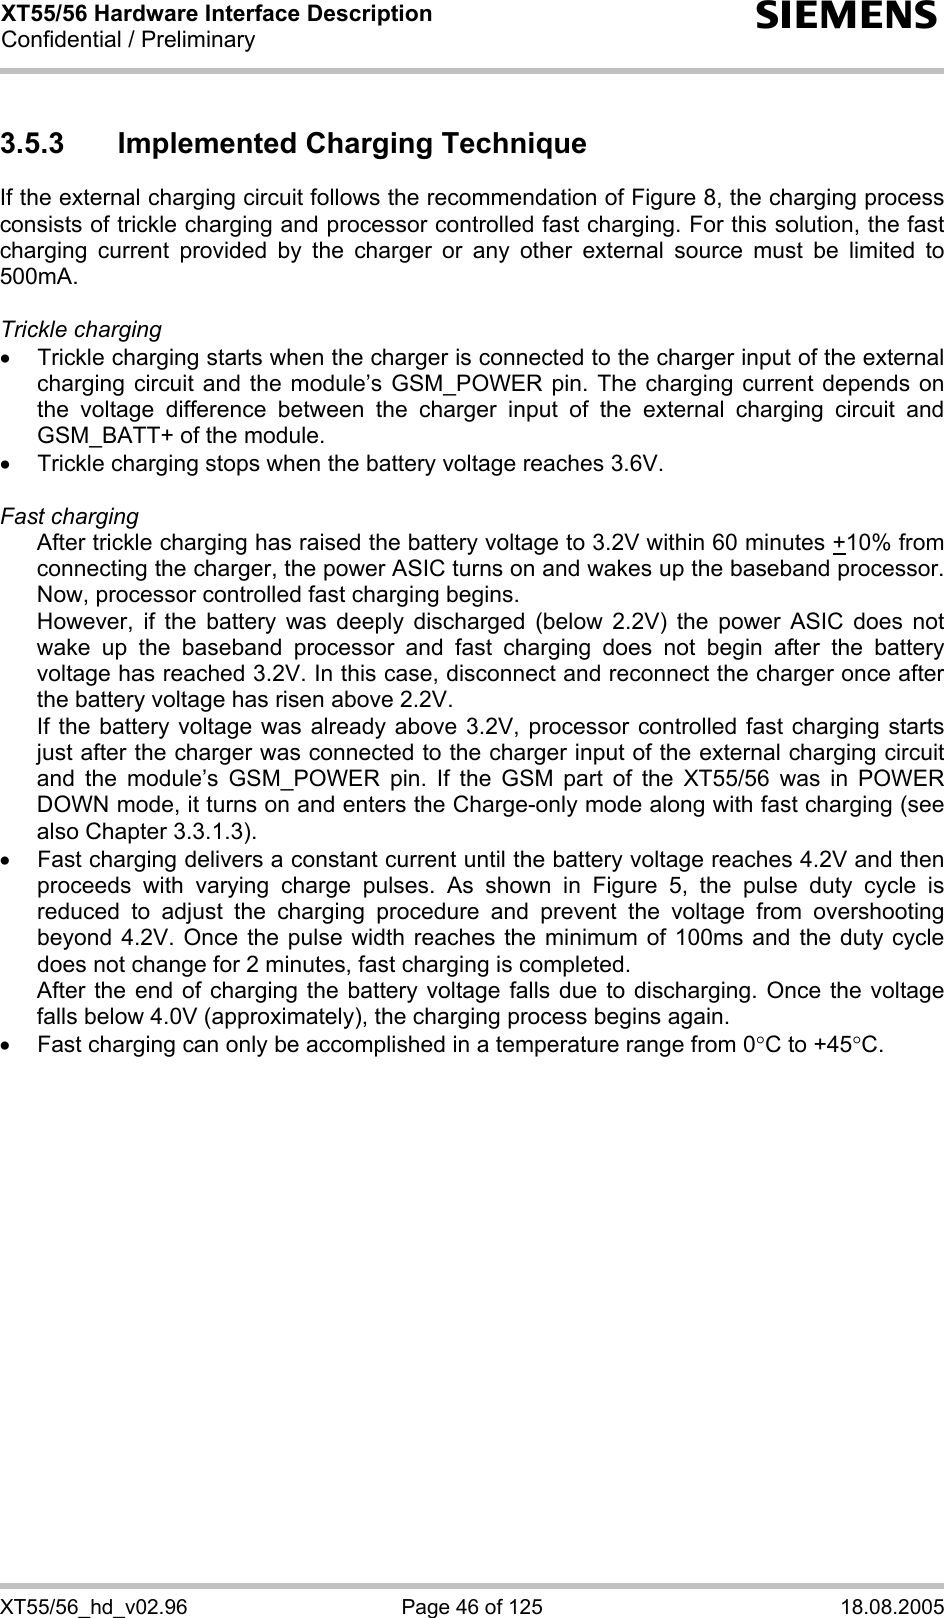 XT55/56 Hardware Interface Description Confidential / Preliminary s XT55/56_hd_v02.96  Page 46 of 125  18.08.2005 3.5.3  Implemented Charging Technique If the external charging circuit follows the recommendation of Figure 8, the charging process consists of trickle charging and processor controlled fast charging. For this solution, the fast charging current provided by the charger or any other external source must be limited to 500mA.   Trickle charging •  Trickle charging starts when the charger is connected to the charger input of the external charging circuit and the module’s GSM_POWER pin. The charging current depends on the voltage difference between the charger input of the external charging circuit and GSM_BATT+ of the module.  •  Trickle charging stops when the battery voltage reaches 3.6V.  Fast charging  After trickle charging has raised the battery voltage to 3.2V within 60 minutes +10% from connecting the charger, the power ASIC turns on and wakes up the baseband processor. Now, processor controlled fast charging begins.  However, if the battery was deeply discharged (below 2.2V) the power ASIC does not wake up the baseband processor and fast charging does not begin after the battery voltage has reached 3.2V. In this case, disconnect and reconnect the charger once after the battery voltage has risen above 2.2V. If the battery voltage was already above 3.2V, processor controlled fast charging starts just after the charger was connected to the charger input of the external charging circuit and the module’s GSM_POWER pin. If the GSM part of the XT55/56 was in POWER DOWN mode, it turns on and enters the Charge-only mode along with fast charging (see also Chapter 3.3.1.3). •  Fast charging delivers a constant current until the battery voltage reaches 4.2V and then proceeds with varying charge pulses. As shown in Figure 5, the pulse duty cycle is reduced to adjust the charging procedure and prevent the voltage from overshooting beyond 4.2V. Once the pulse width reaches the minimum of 100ms and the duty cycle does not change for 2 minutes, fast charging is completed.  After the end of charging the battery voltage falls due to discharging. Once the voltage falls below 4.0V (approximately), the charging process begins again. •  Fast charging can only be accomplished in a temperature range from 0°C to +45°C.  